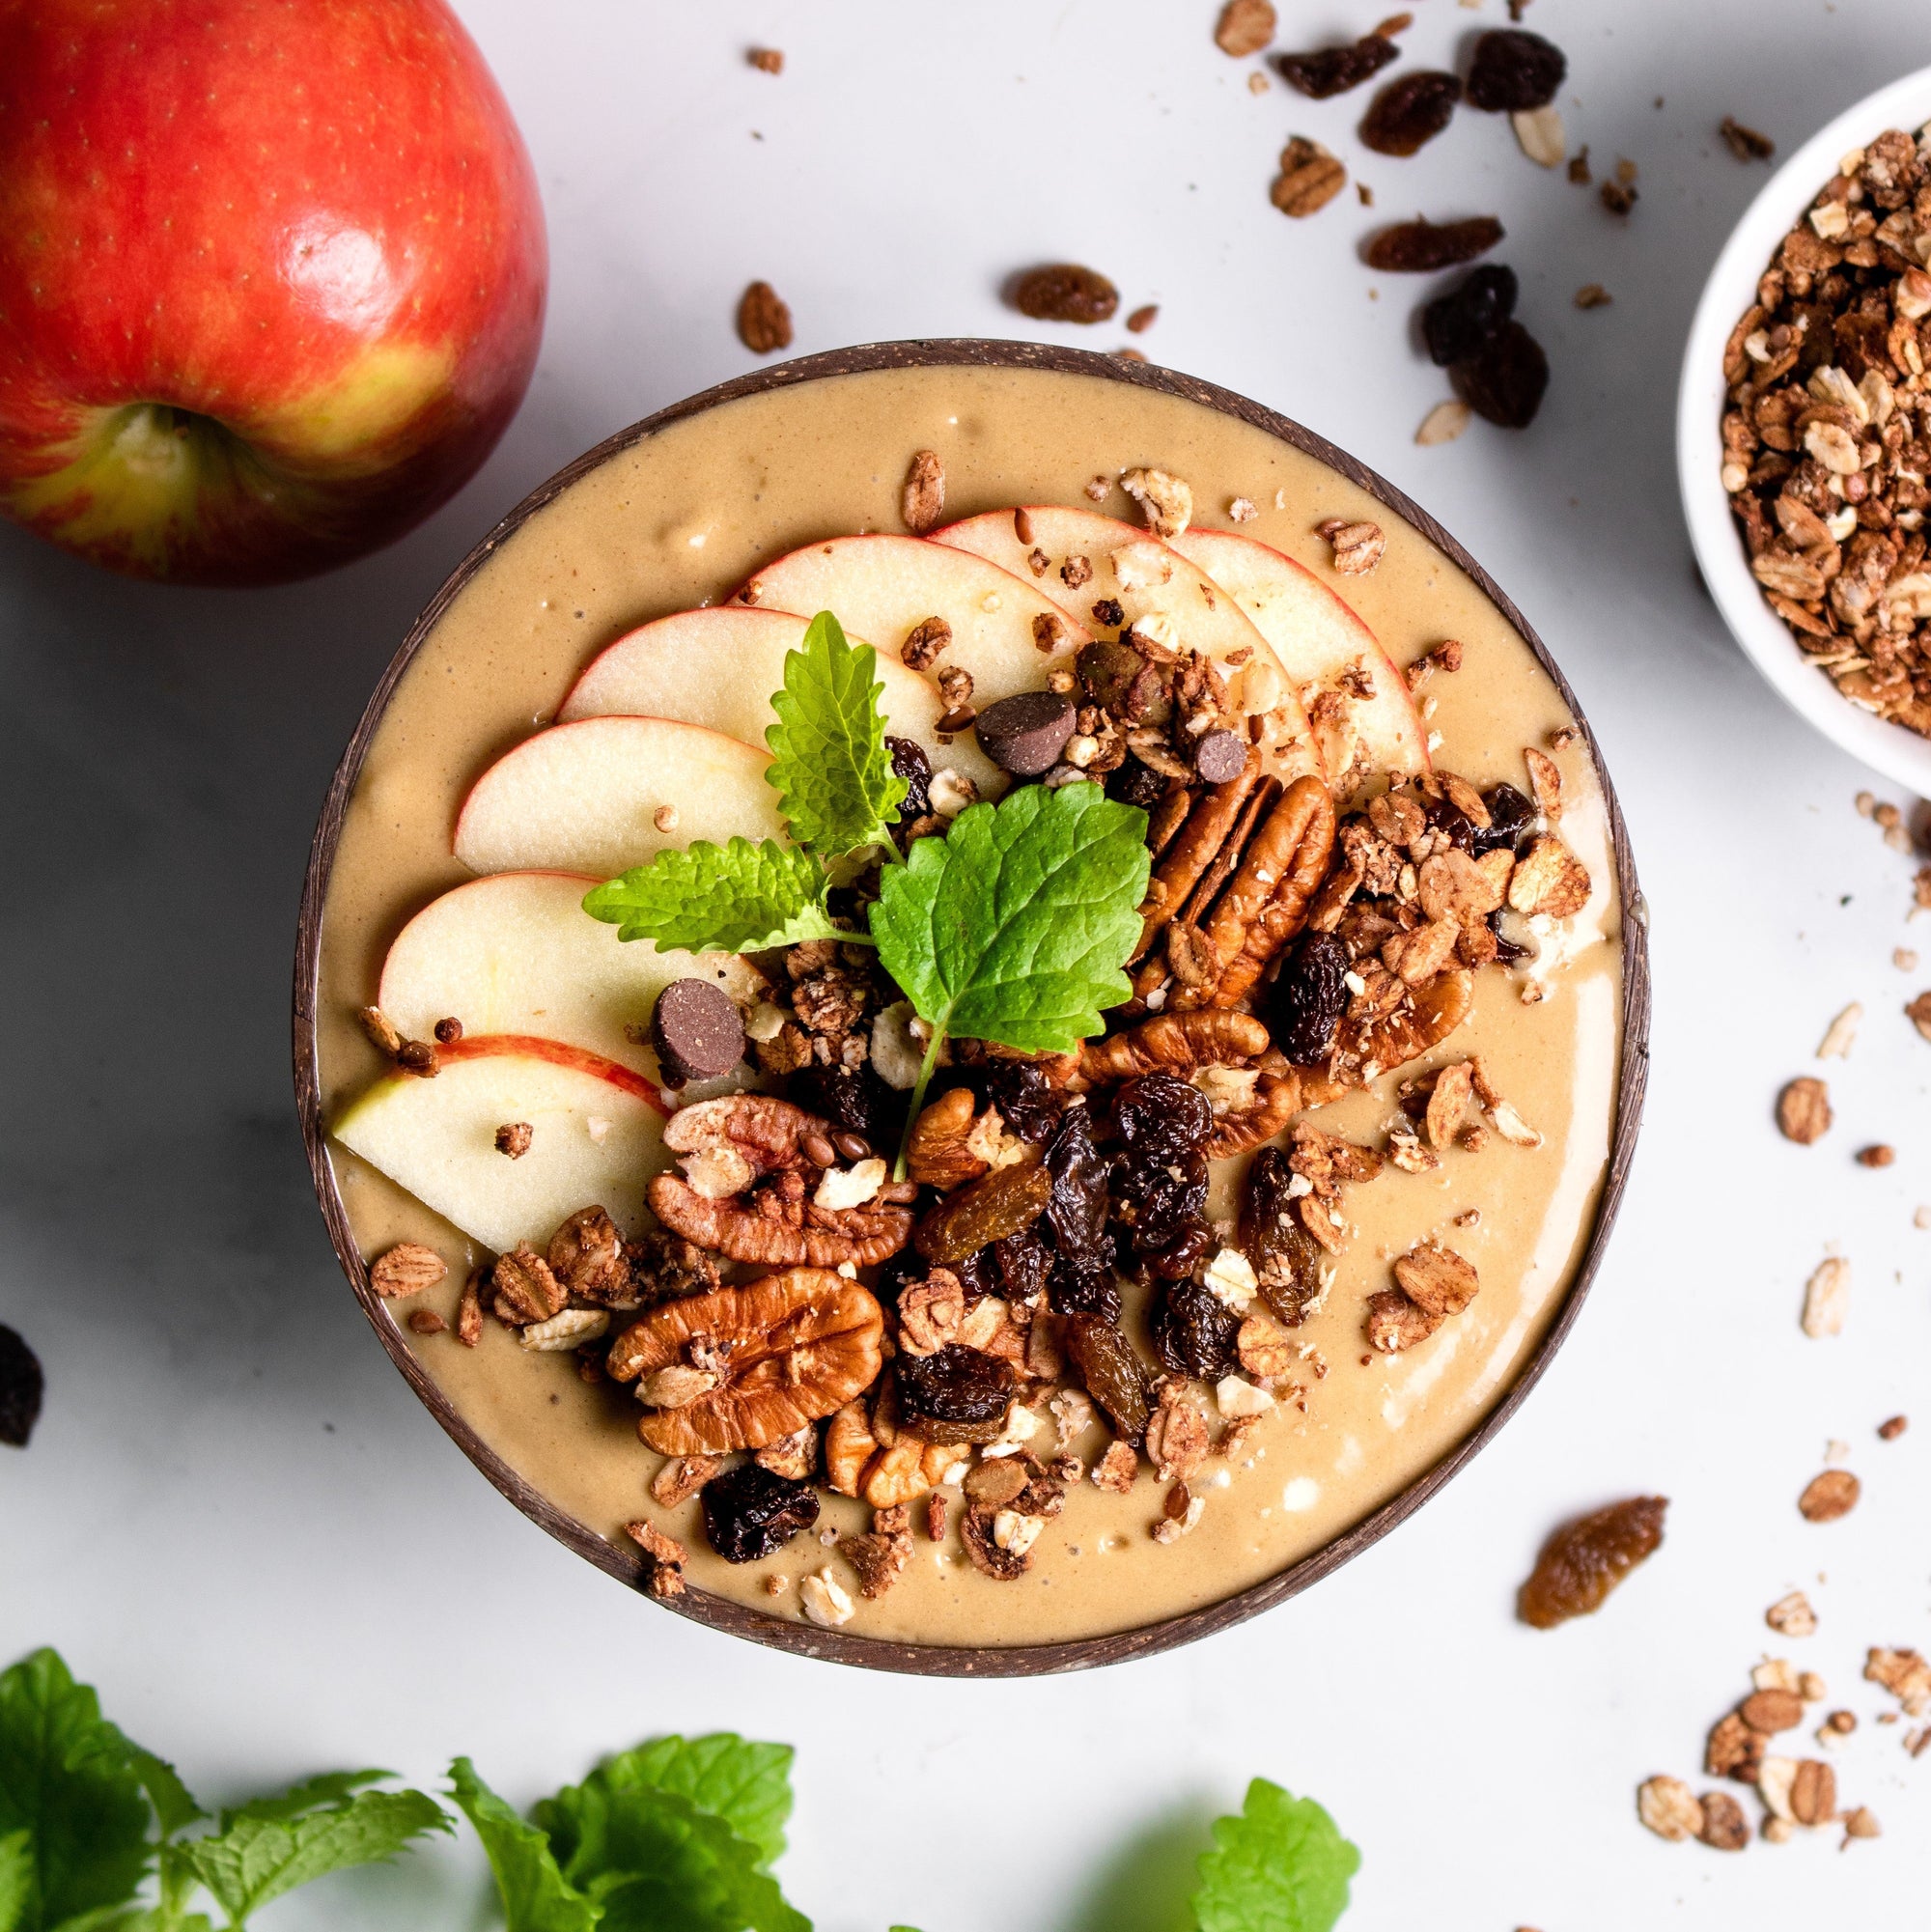 Apple & Salted Caramel Smoothie Bowl - Good Protein